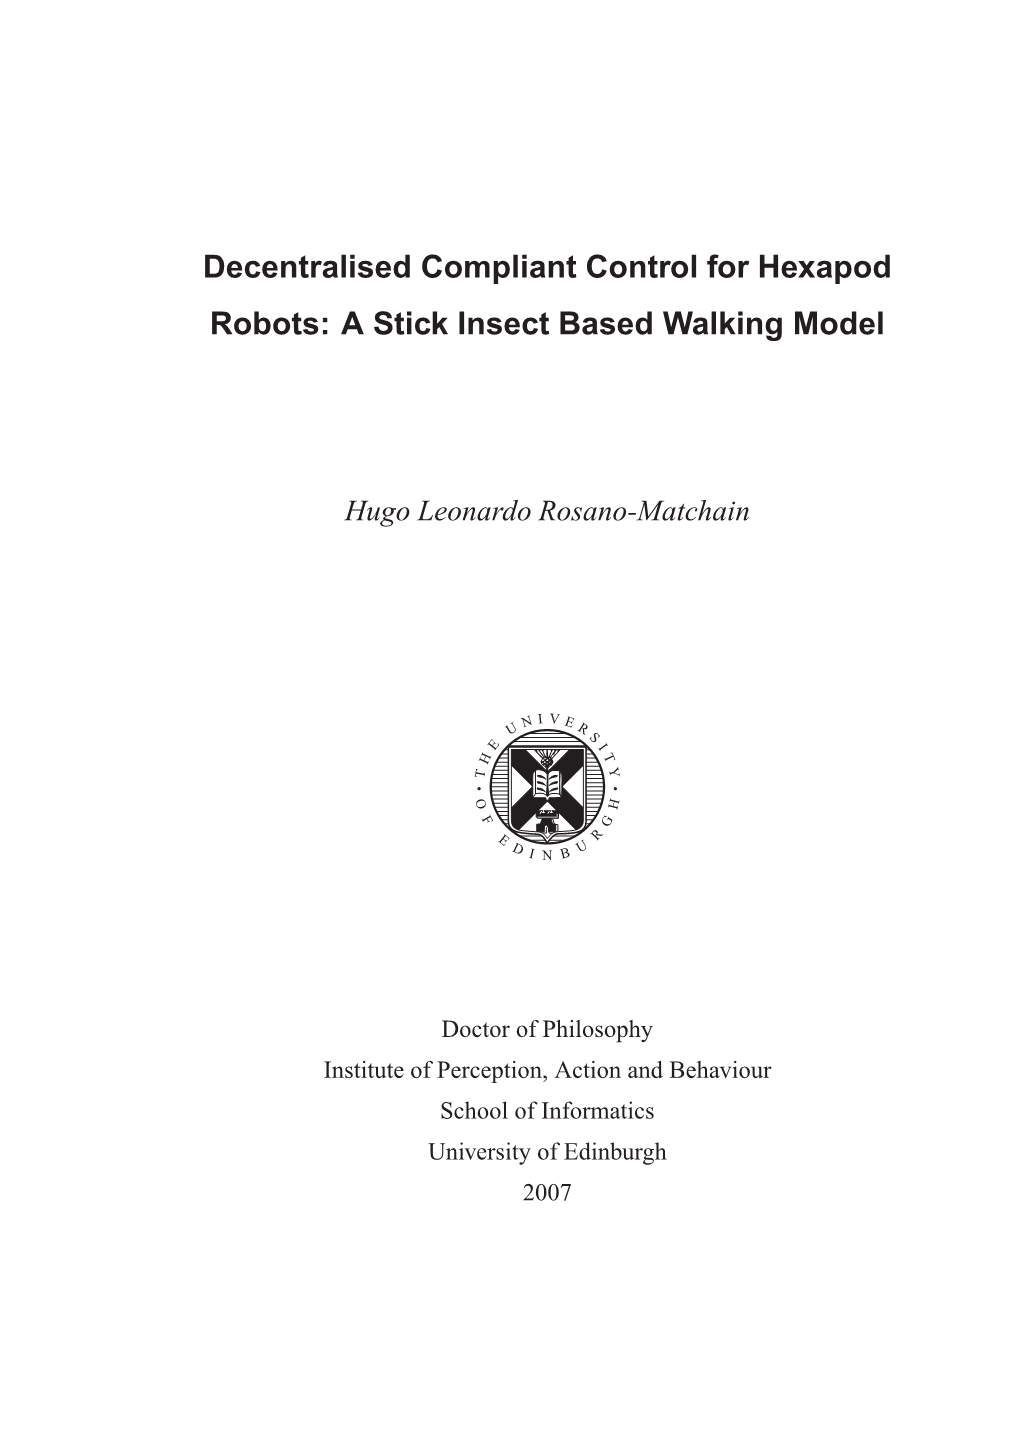 Decentralised Compliant Control for Hexapod Robots: a Stick Insect Based Walking Model